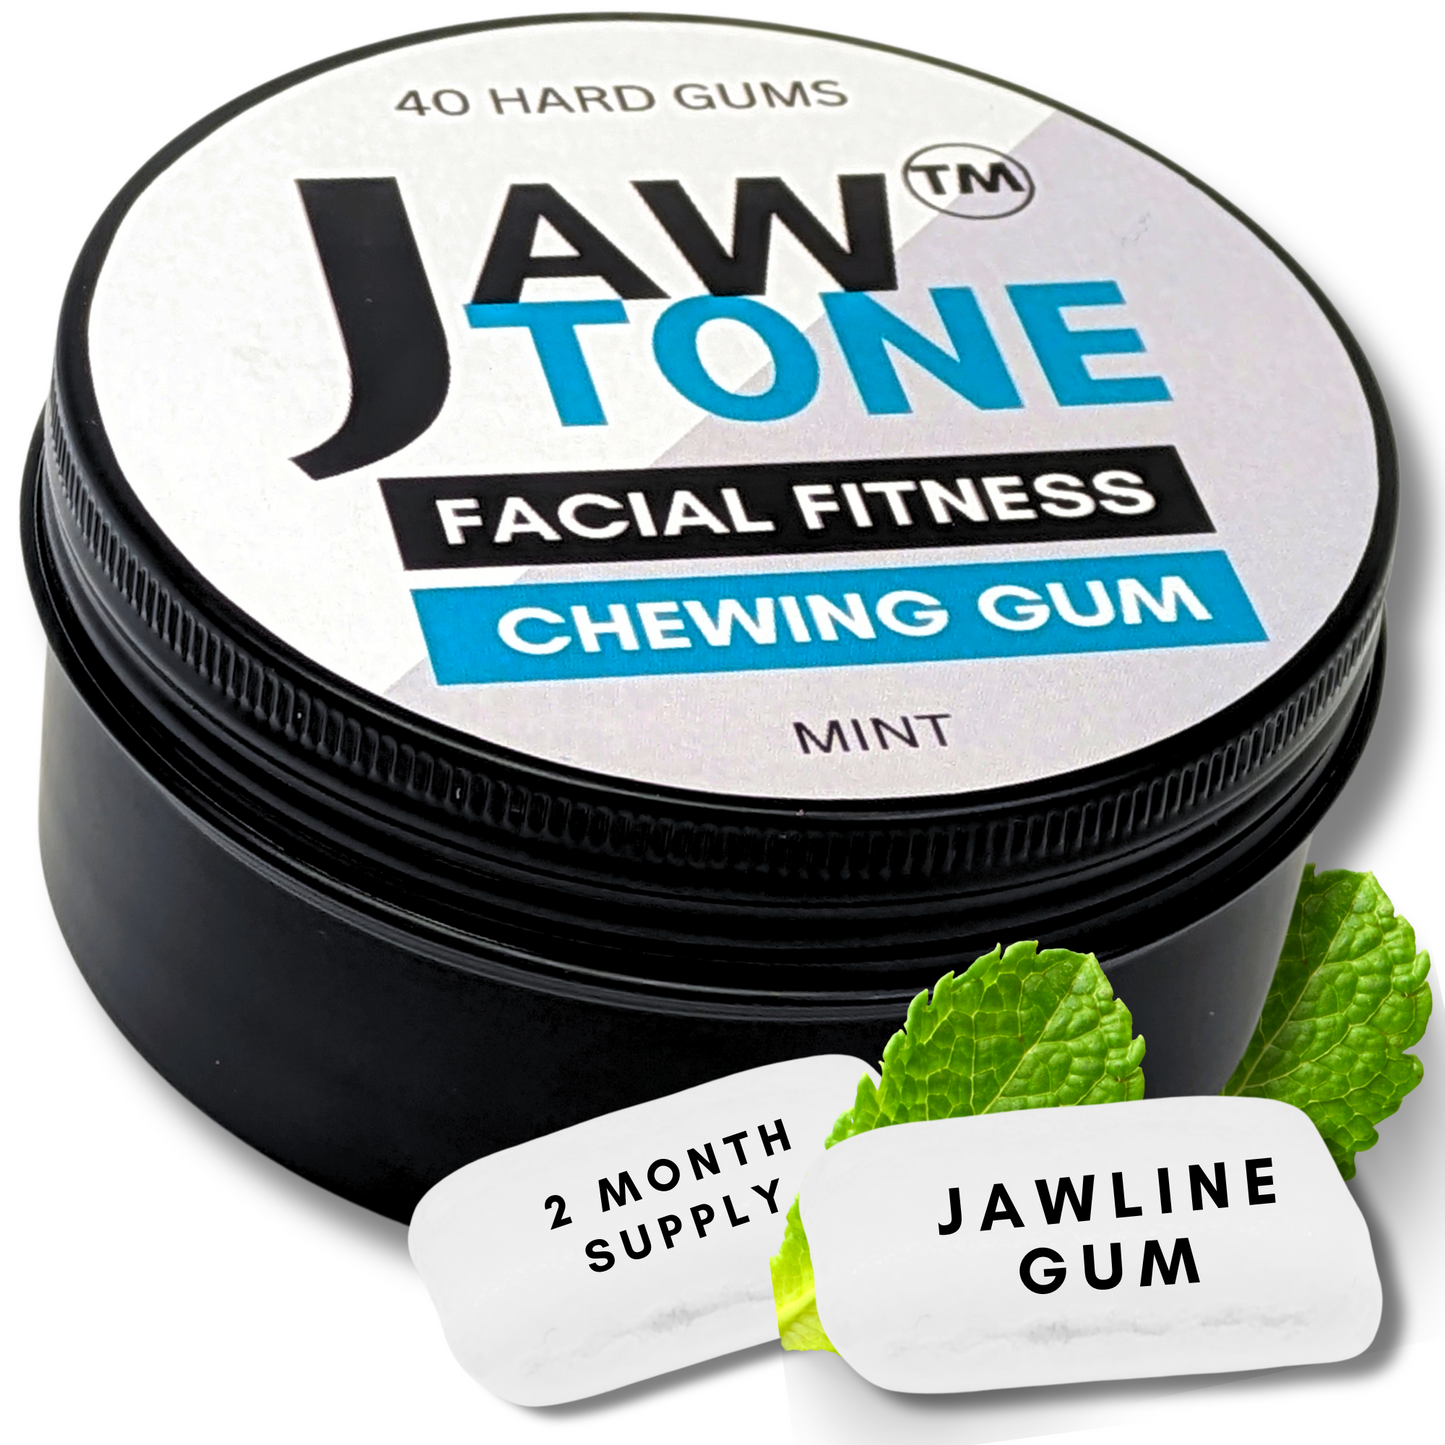 jawline gum 2 months supply effective jaw exerciser and double chin reducer 